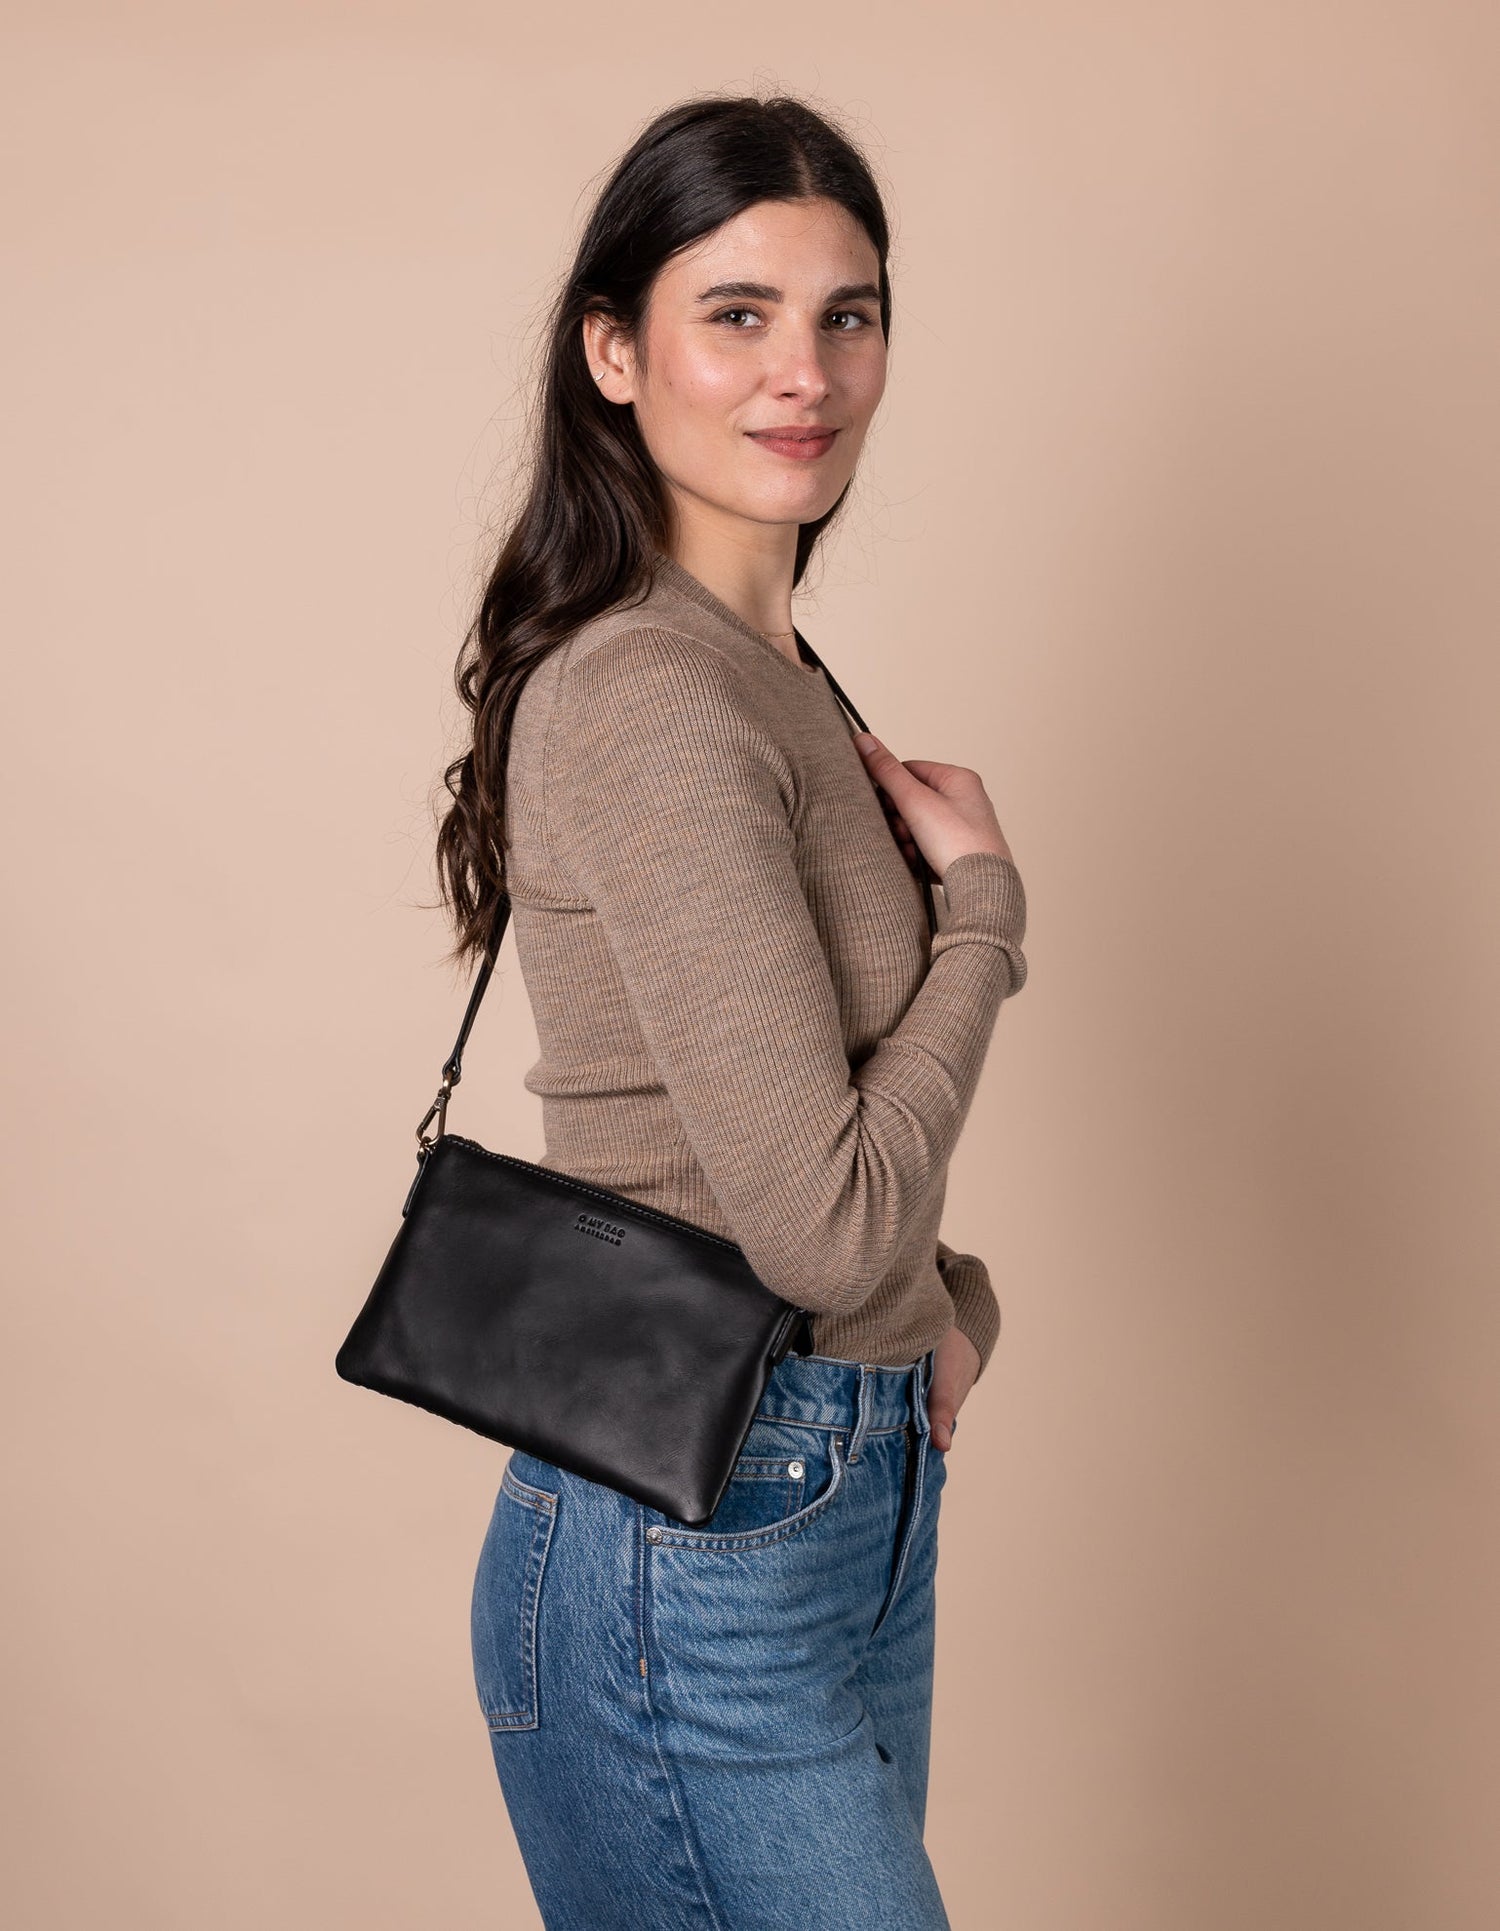 O My Bag Amsterdam Lexi Cross Body Bag: Introducing Lexi, the ultimate wing-woman! This petite woven leather handbag is the perfect cross body bag for all your on-the-go escapades.  Don't let her small size fool you, Lexi is a master of organization with inside pockets for all your essentials like your phone, keys and wallet. Made in India.